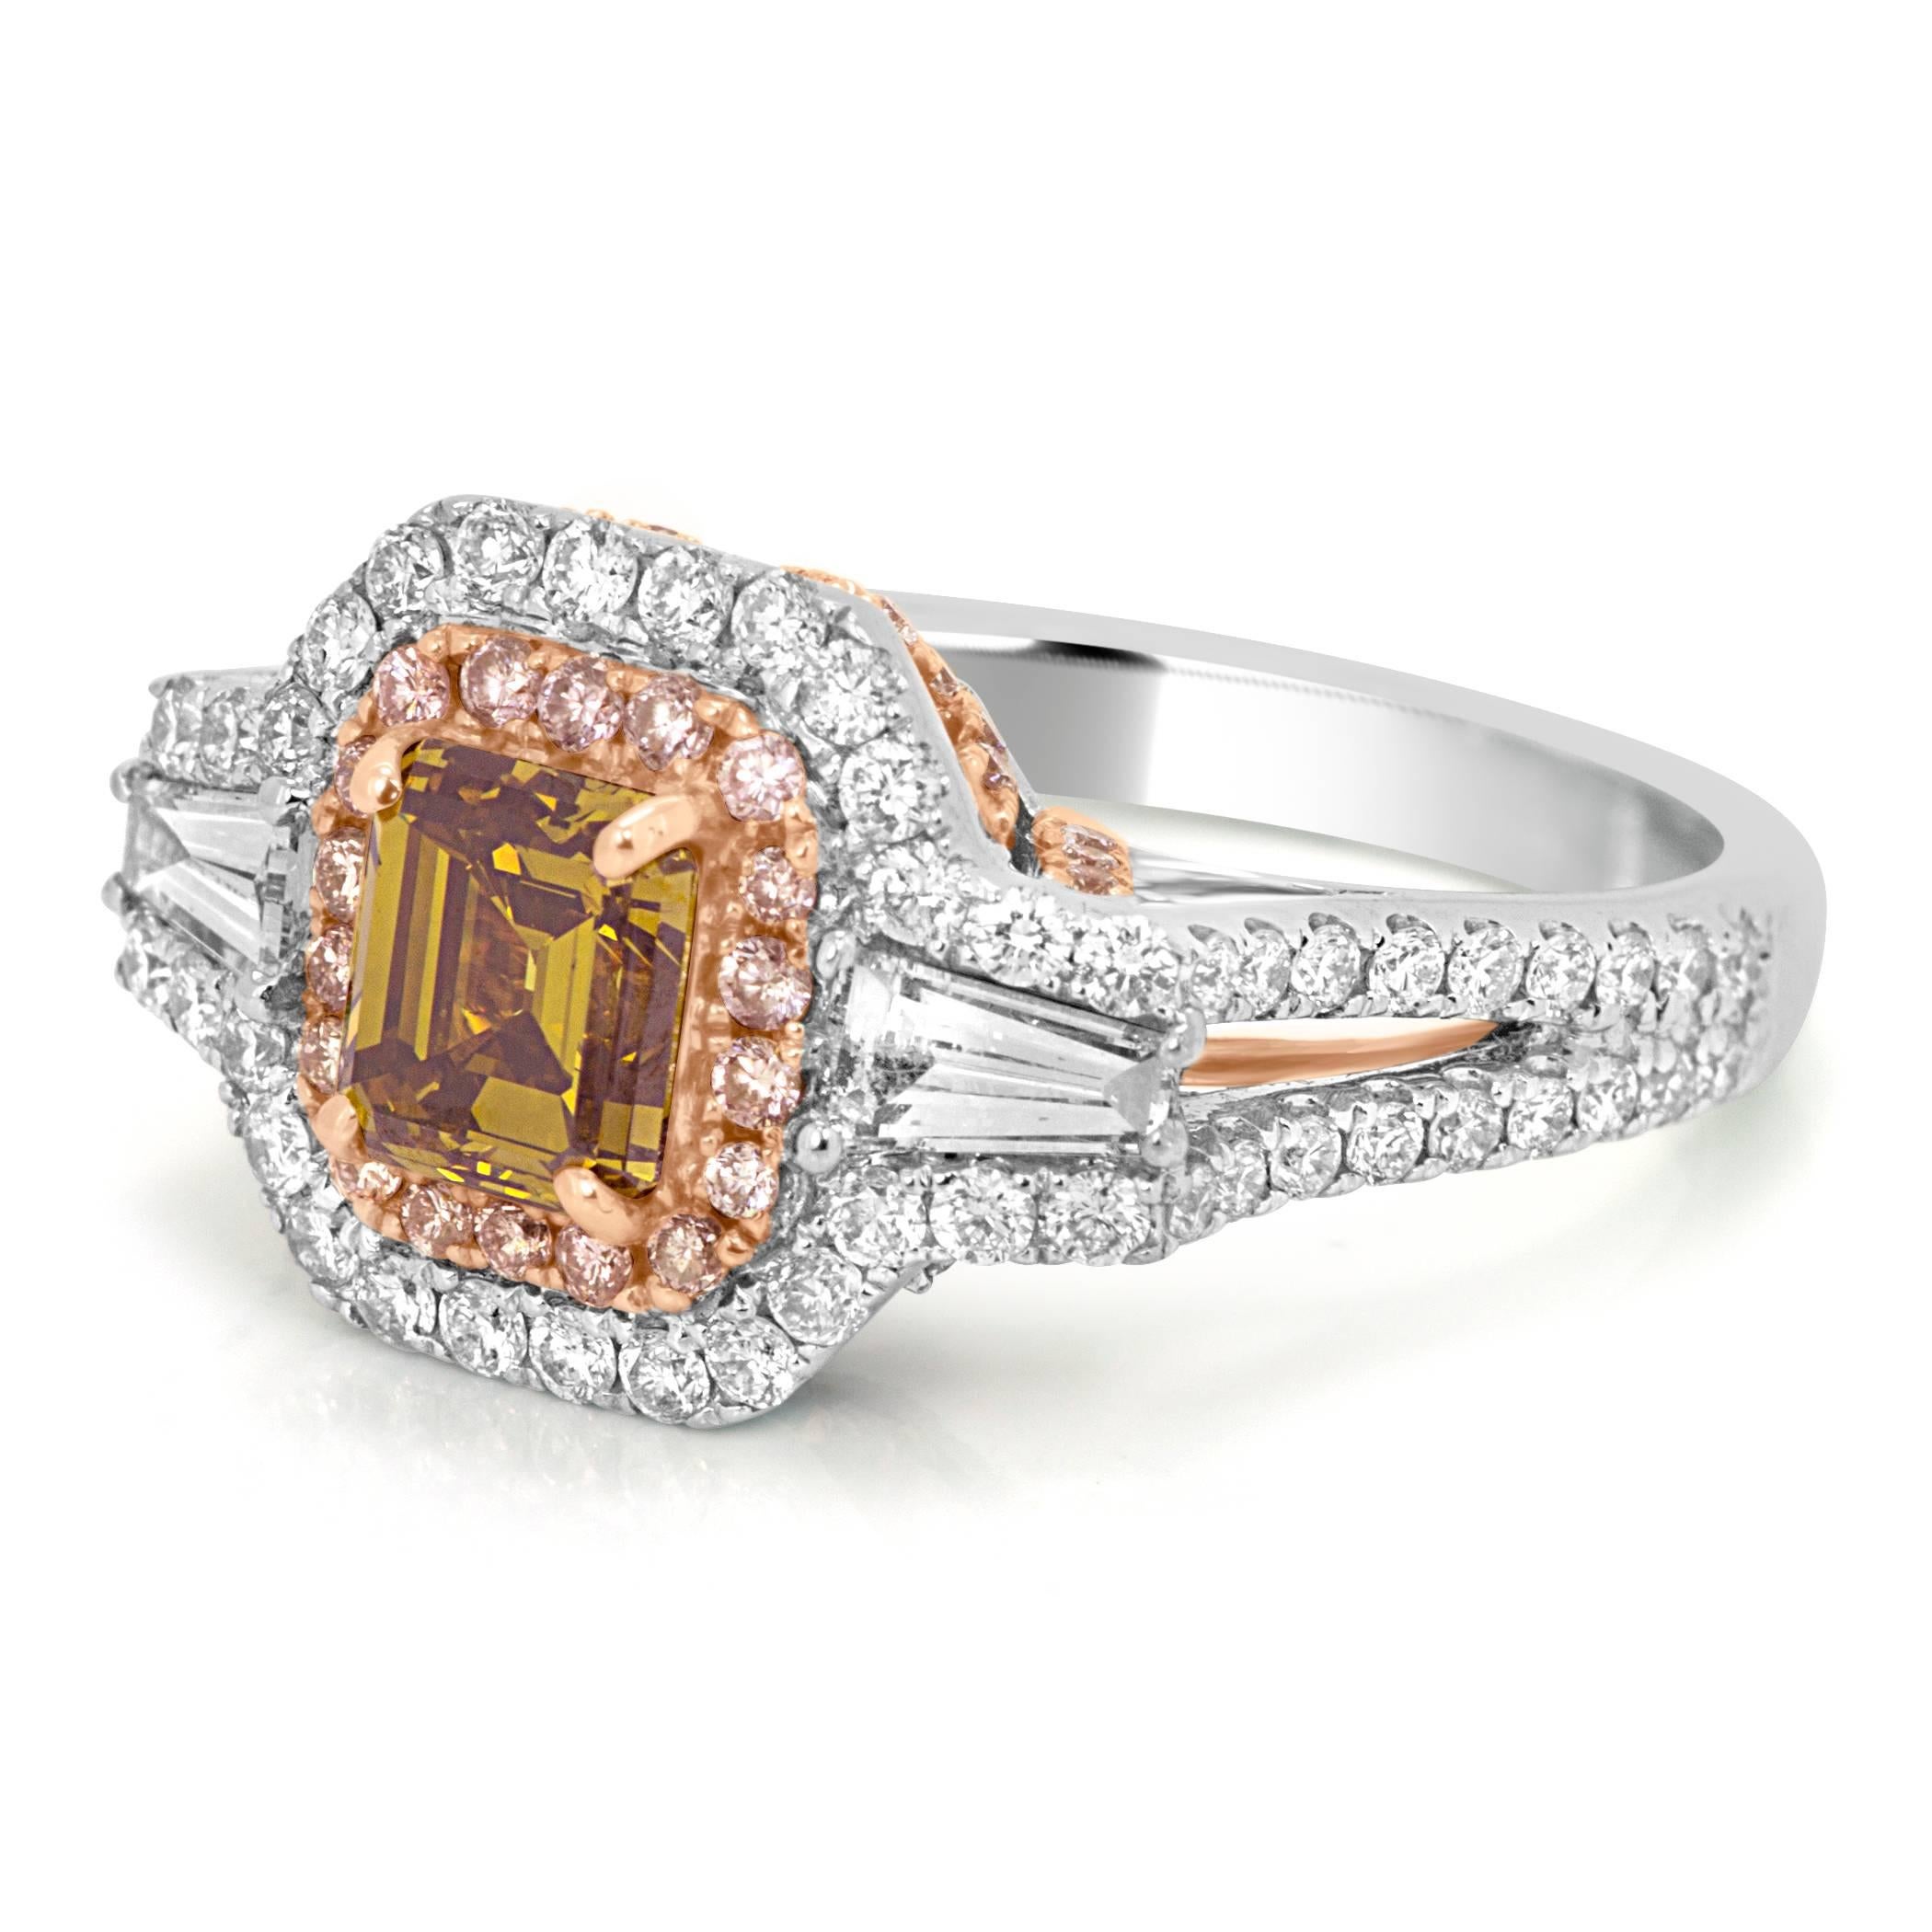 EGL USA Certified Natural Fancy Deep Yellowish Orangish Brown Emerald Cut VS2 1.12 Carat encircled in Double Halo of Natural Fancy Pink Diamond Round 0.37 Carat and White Diamond Round 0.68 Carat Flanked by 2 White Diamond Tapers 0.32 Carat in 18k